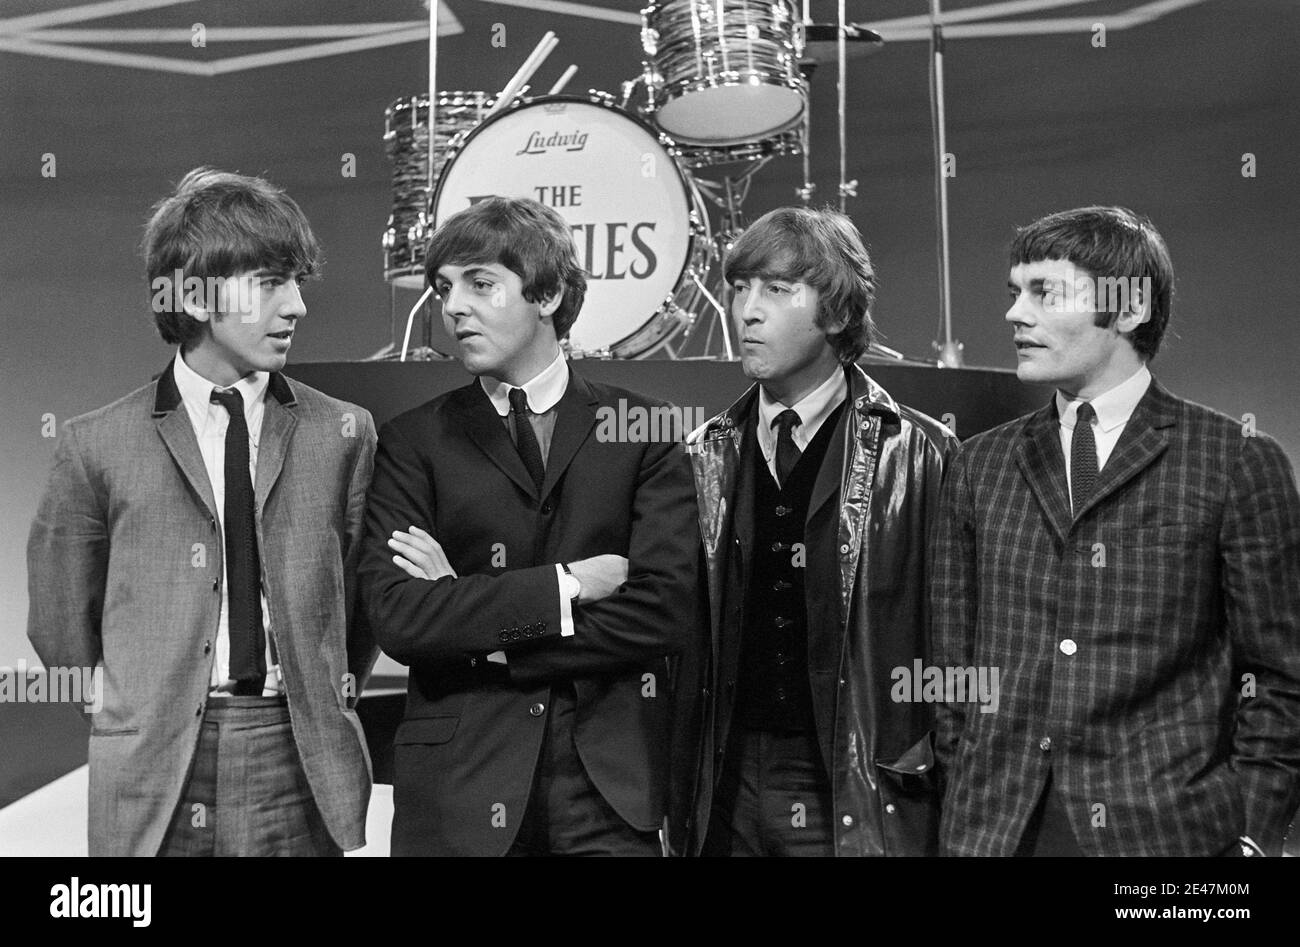 The Beatles (with Jimmie Nichols standing in for Ringo Starr) at a television appearance in Treslong in Hillegom, Netherlands, not far from Amsterdam, on June 5, 1964. Stock Photo